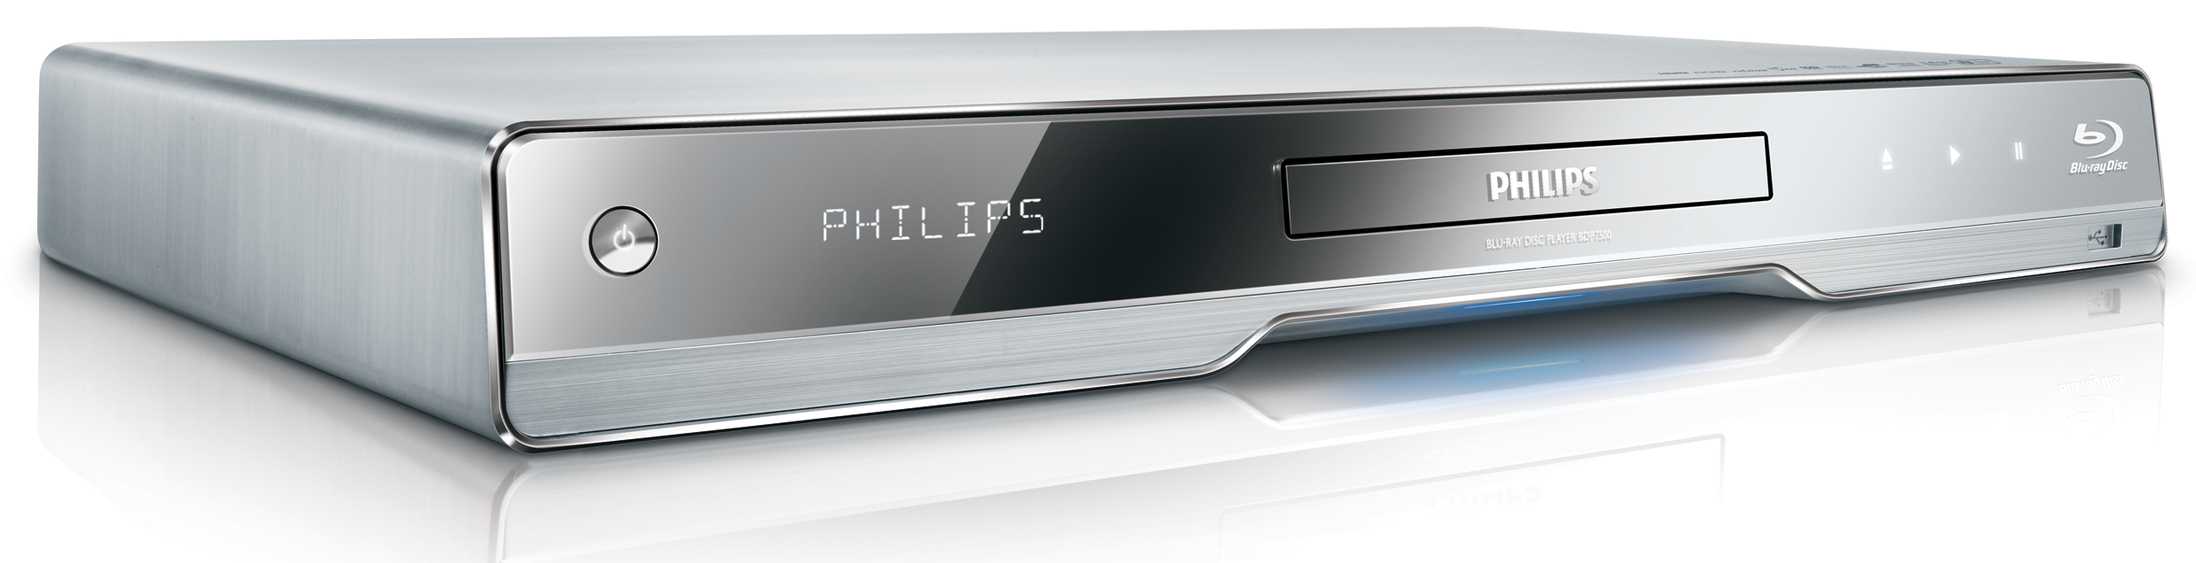 Phillips Blu Ray Disc Player large image 0